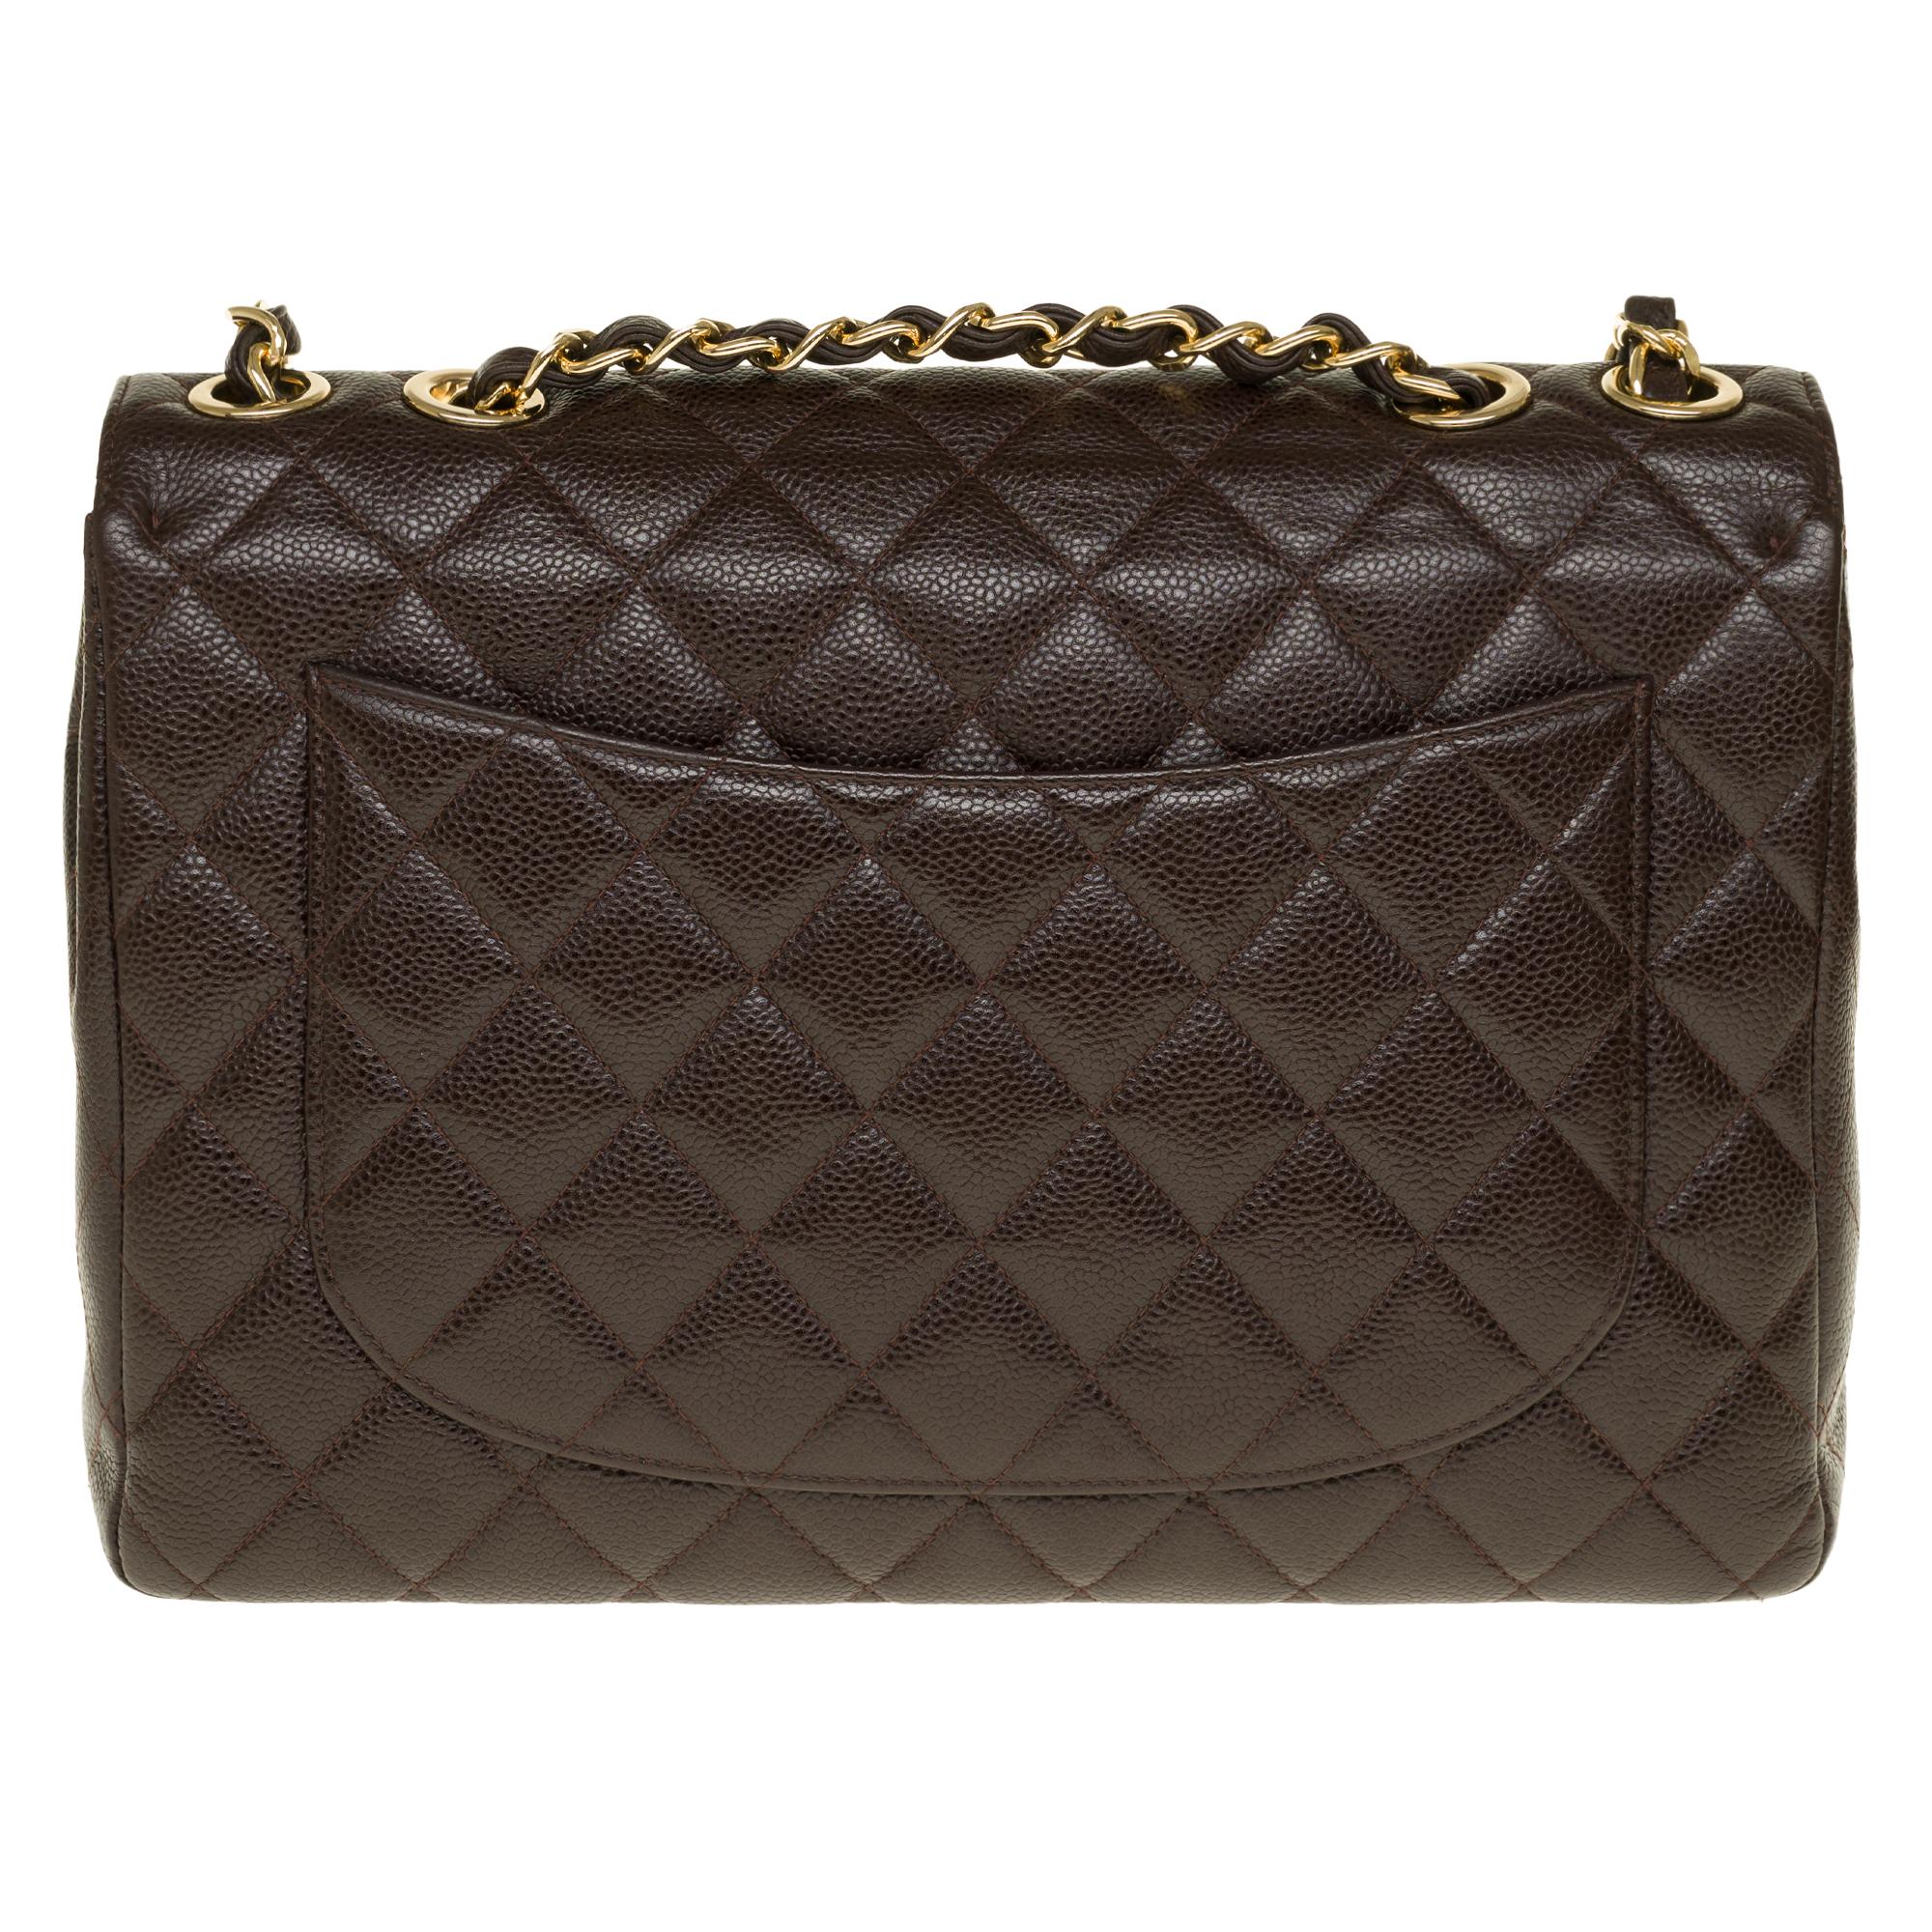 Black Chanel Timeless Jumbo single flap handbag in brown quilted caviar leather, GHW